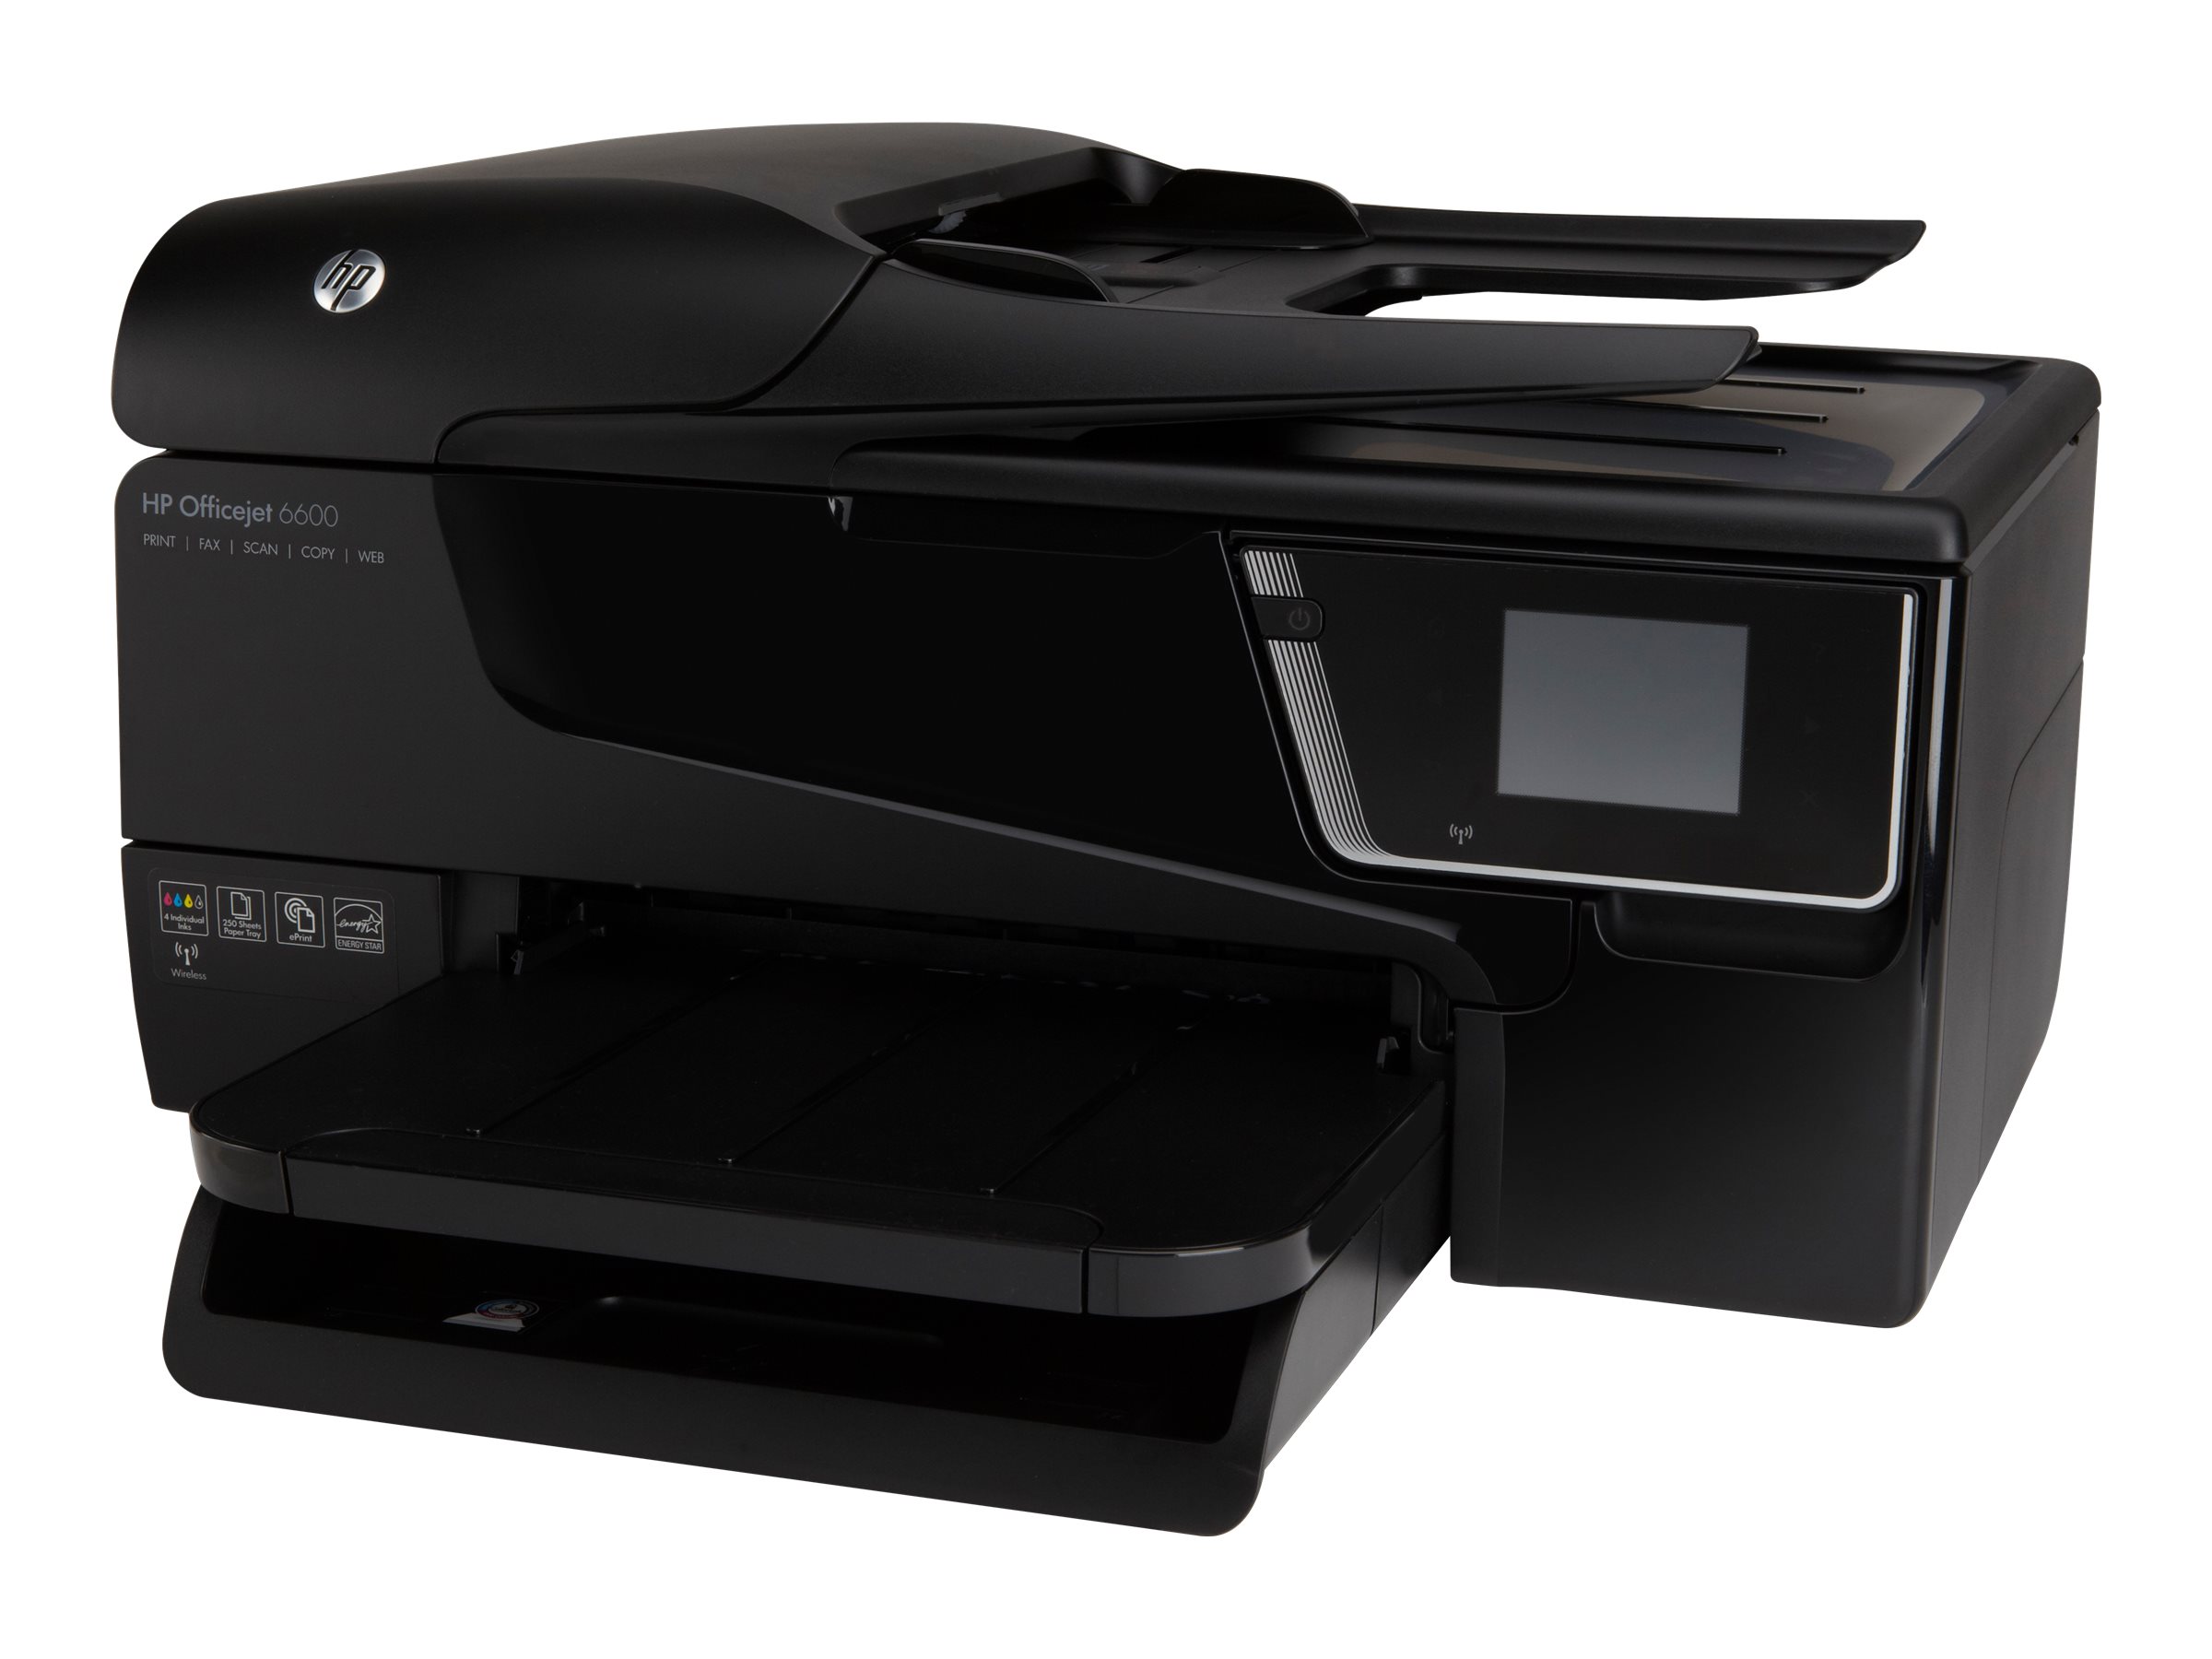 HP Officejet 6600 e-All-in-One H711a - Multifunction printer - color - ink-jet - Legal (8.5 in x 14 in)/A4 (8.25 in x 11.7 in) (original) - Legal (media) - up to 32 ppm (copying) - up to 14 ppm (printing) - 250 sheets - 33.6 Kbps - USB 2.0, Wi-Fi(n) - image 1 of 8